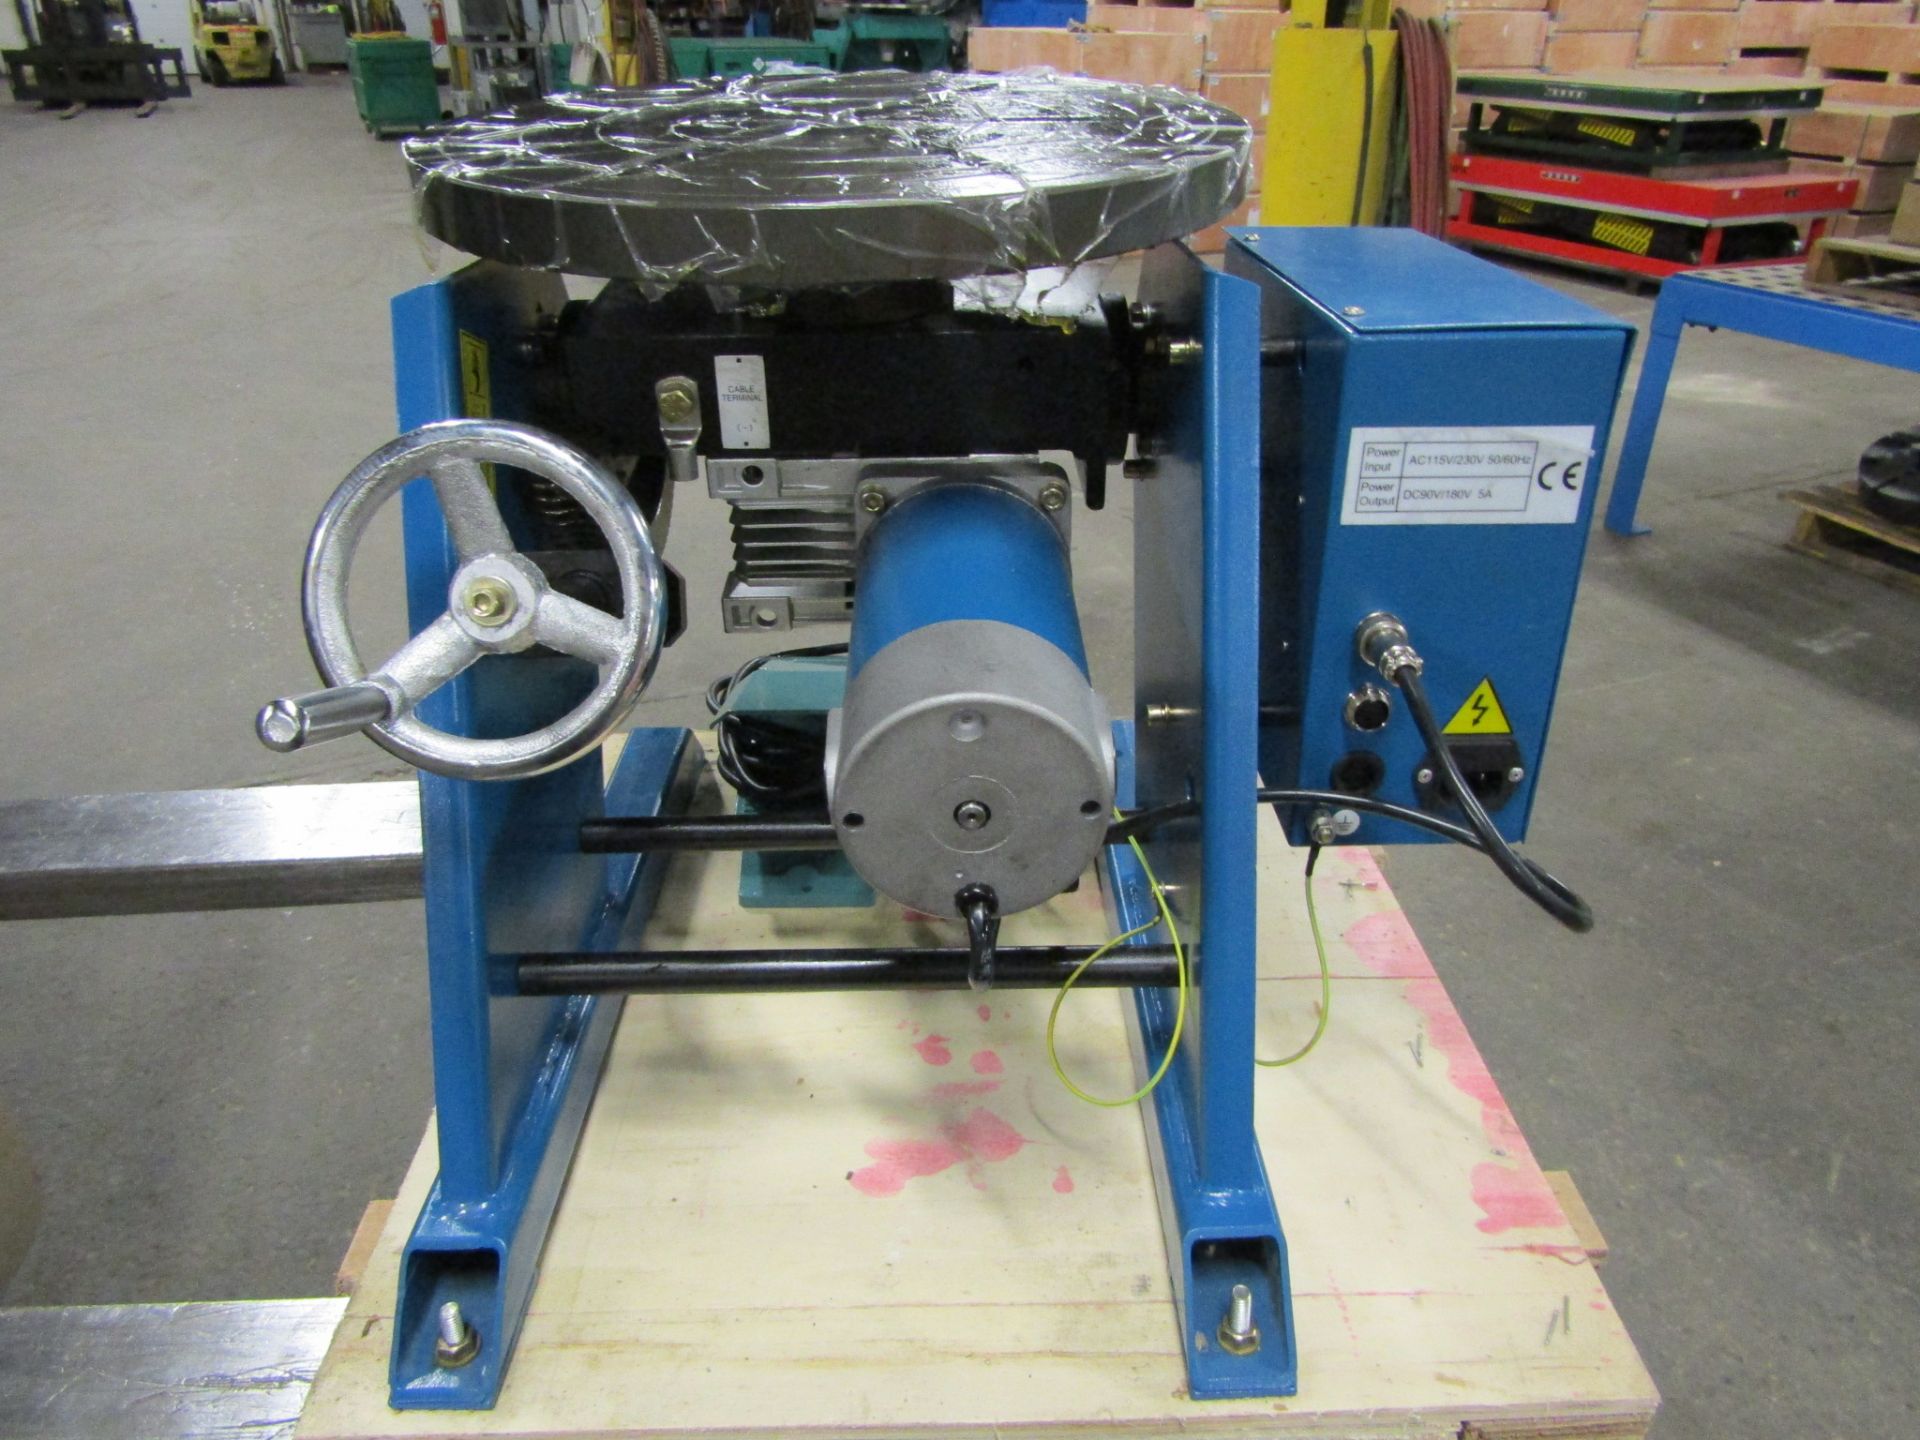 Verner model VD-700 WELDING POSITIONER 700lbs capacity - tilt and rotate with variable speed drive - Image 2 of 2